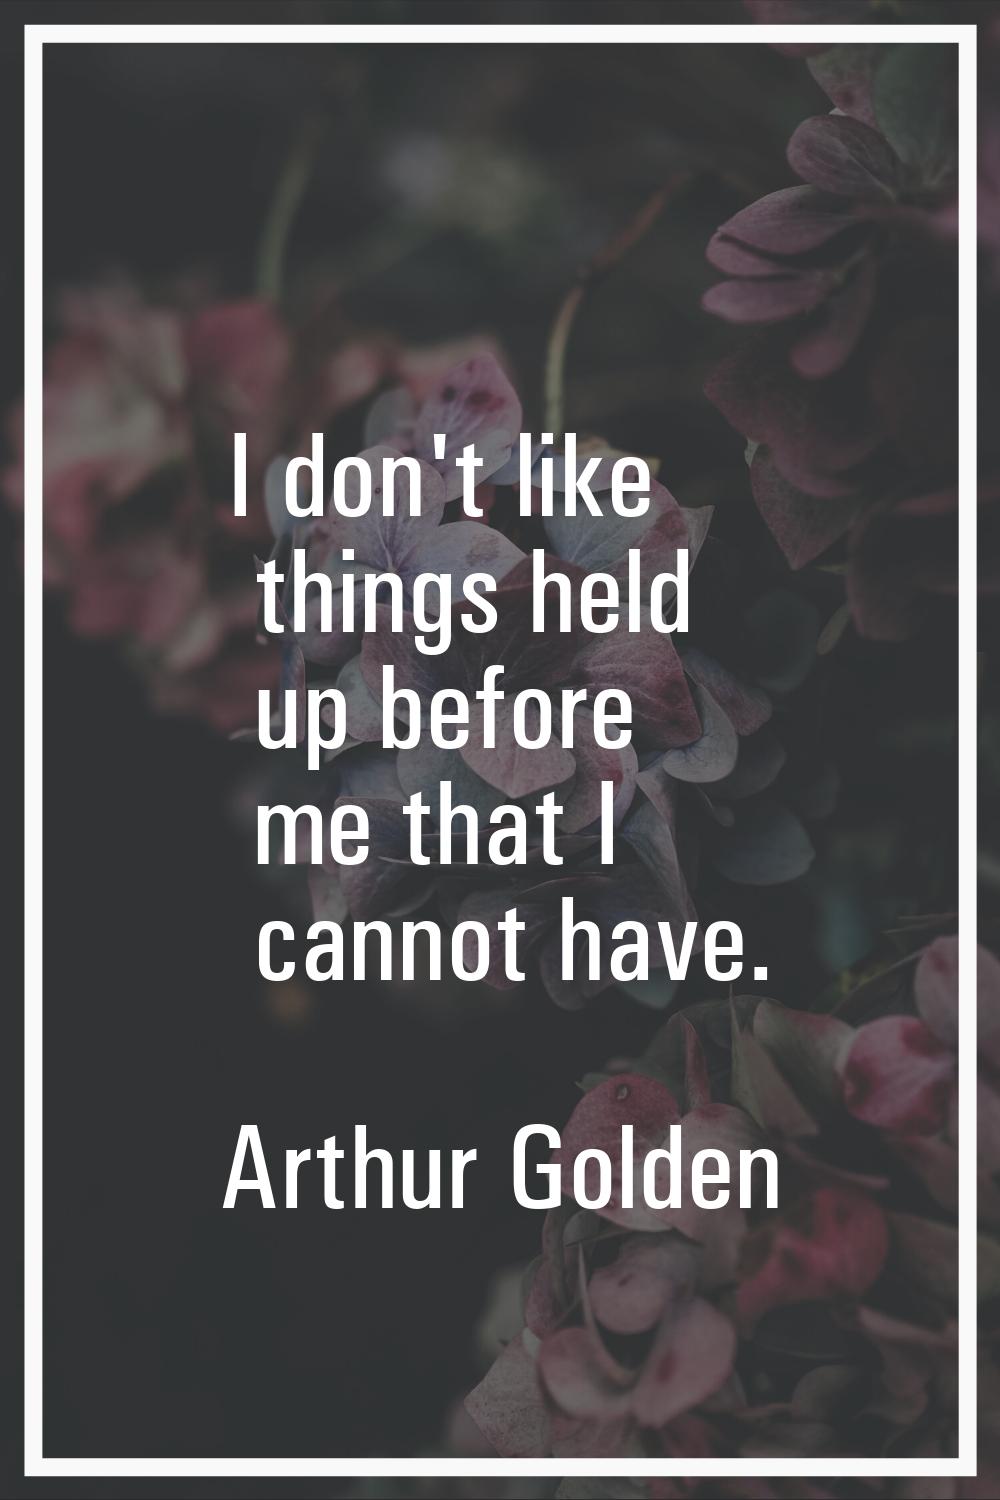 I don't like things held up before me that I cannot have.